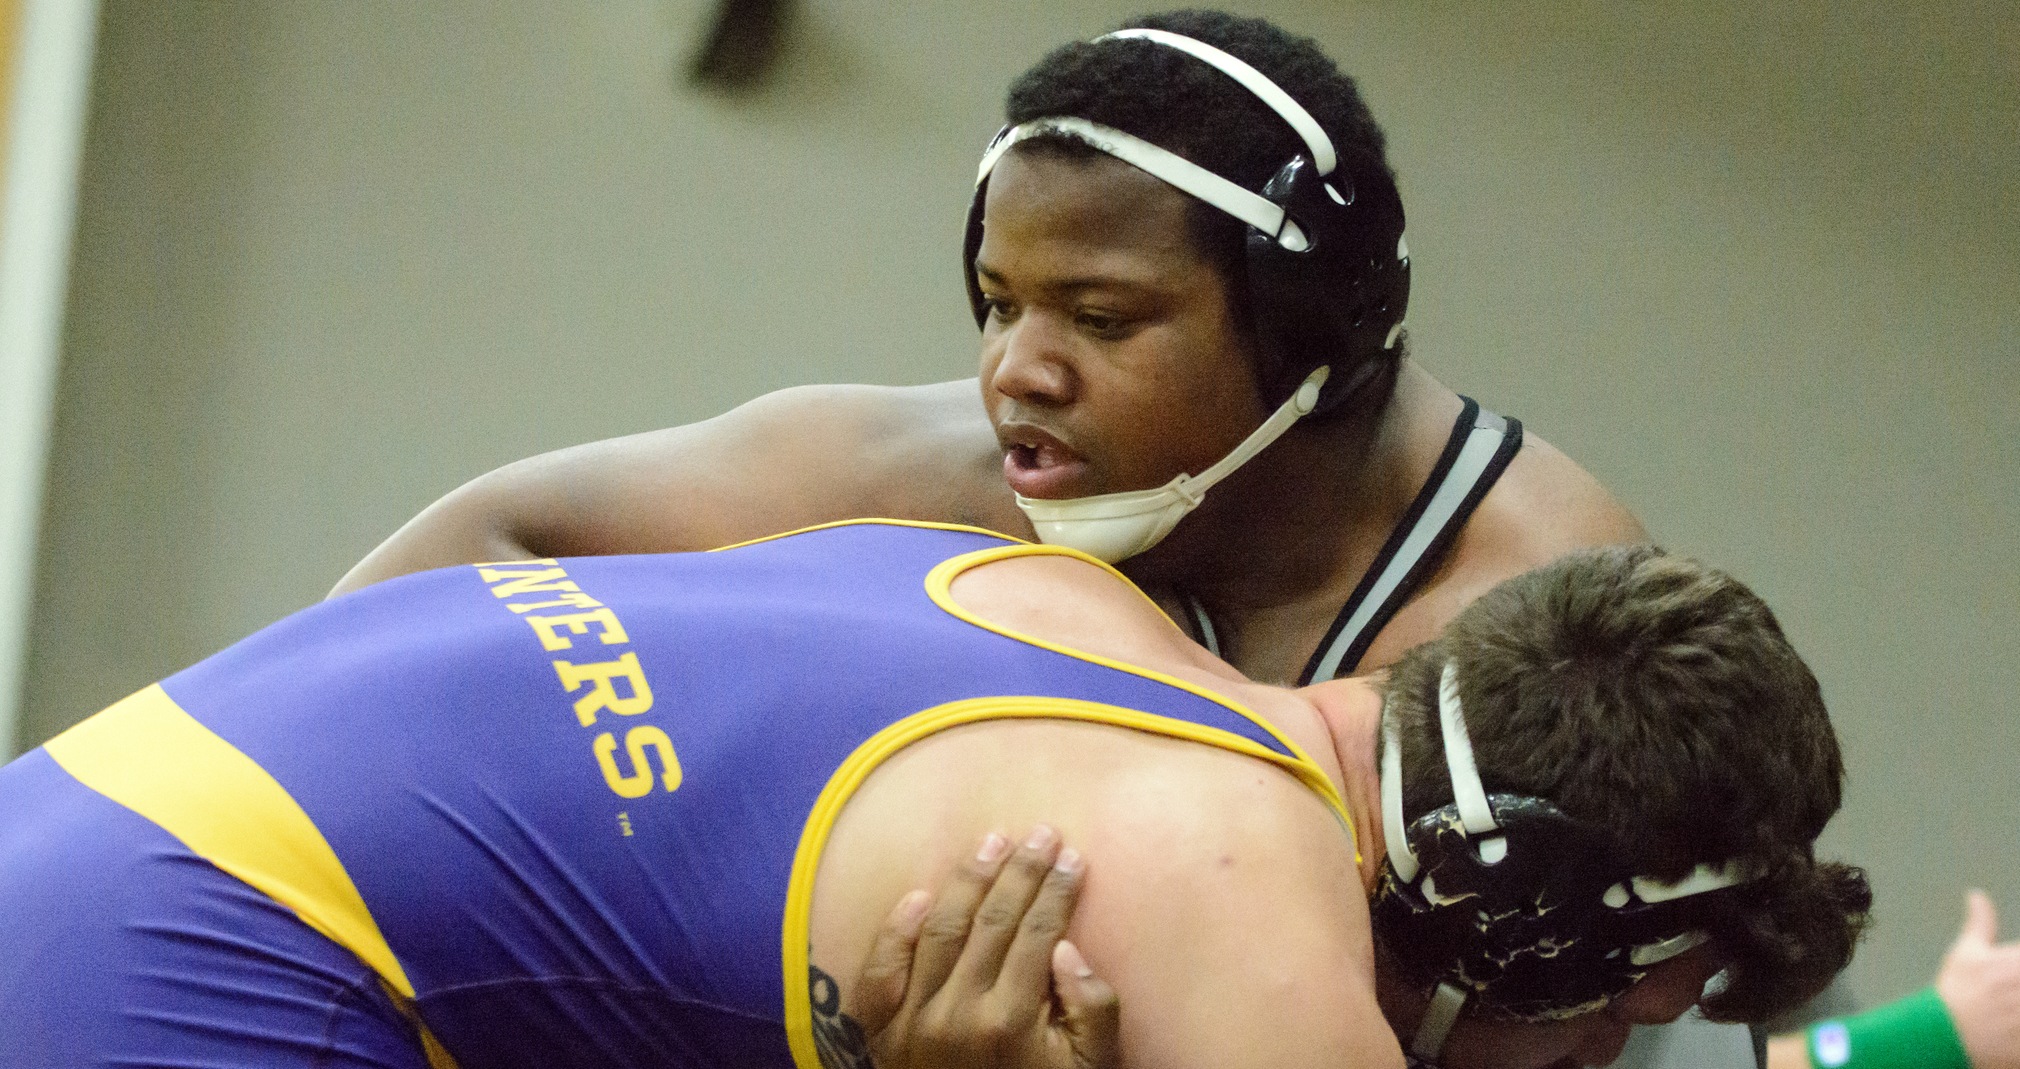 Michael Dunlap gave UW-Oshkosh its fifth victory against the Pointers with his 5-3 win at 285 pounds.